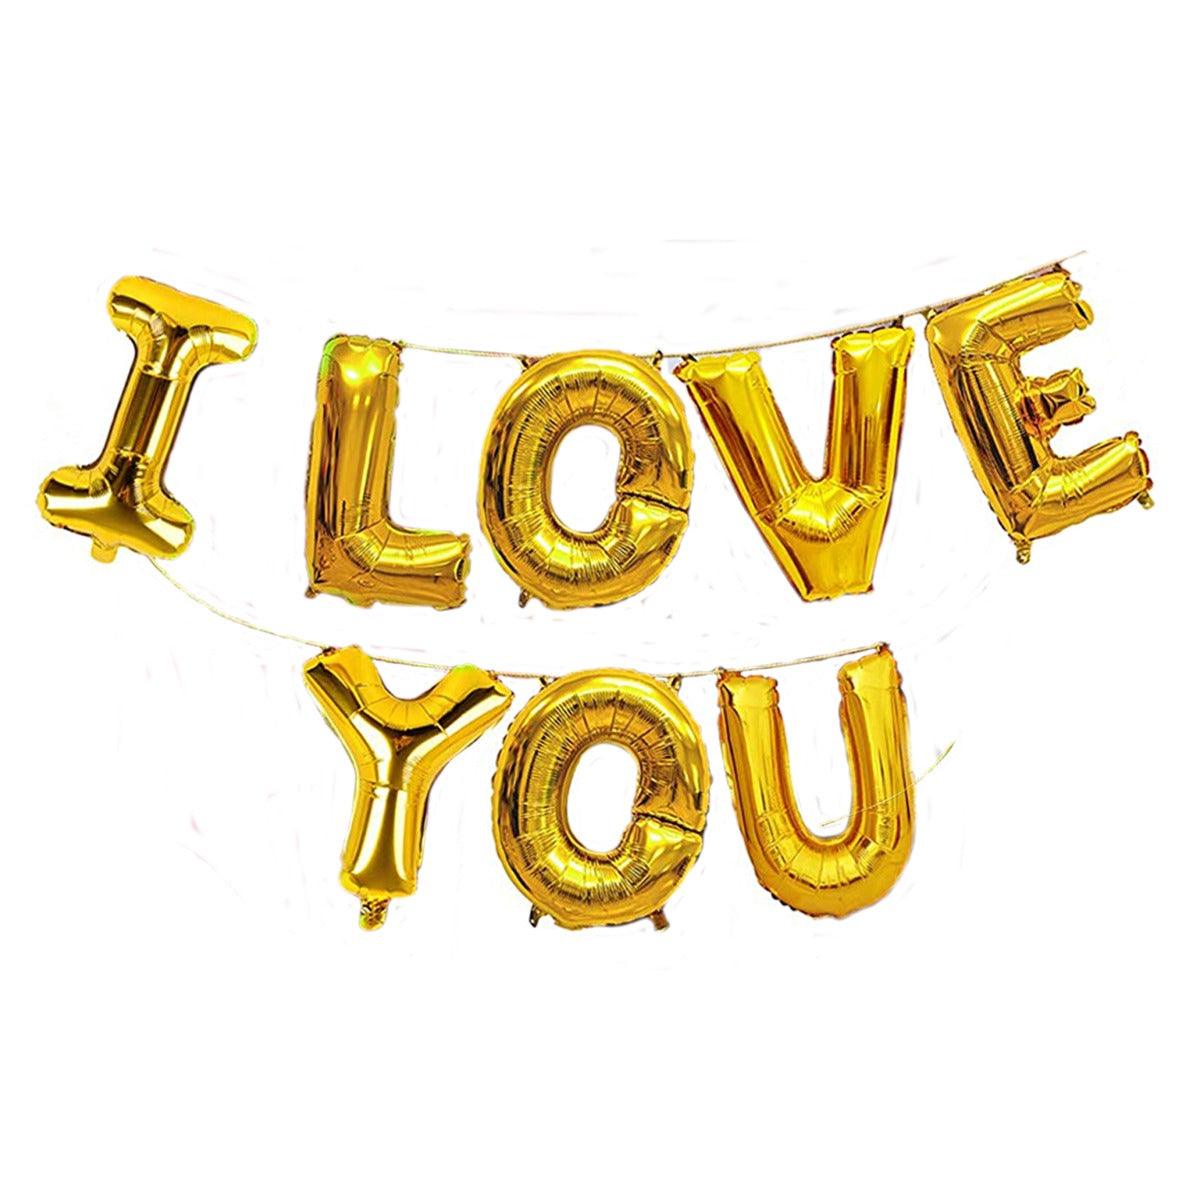 PartyCorp Gold I Love You Alphabet/Letter Foil Balloon Banner Decoration Set